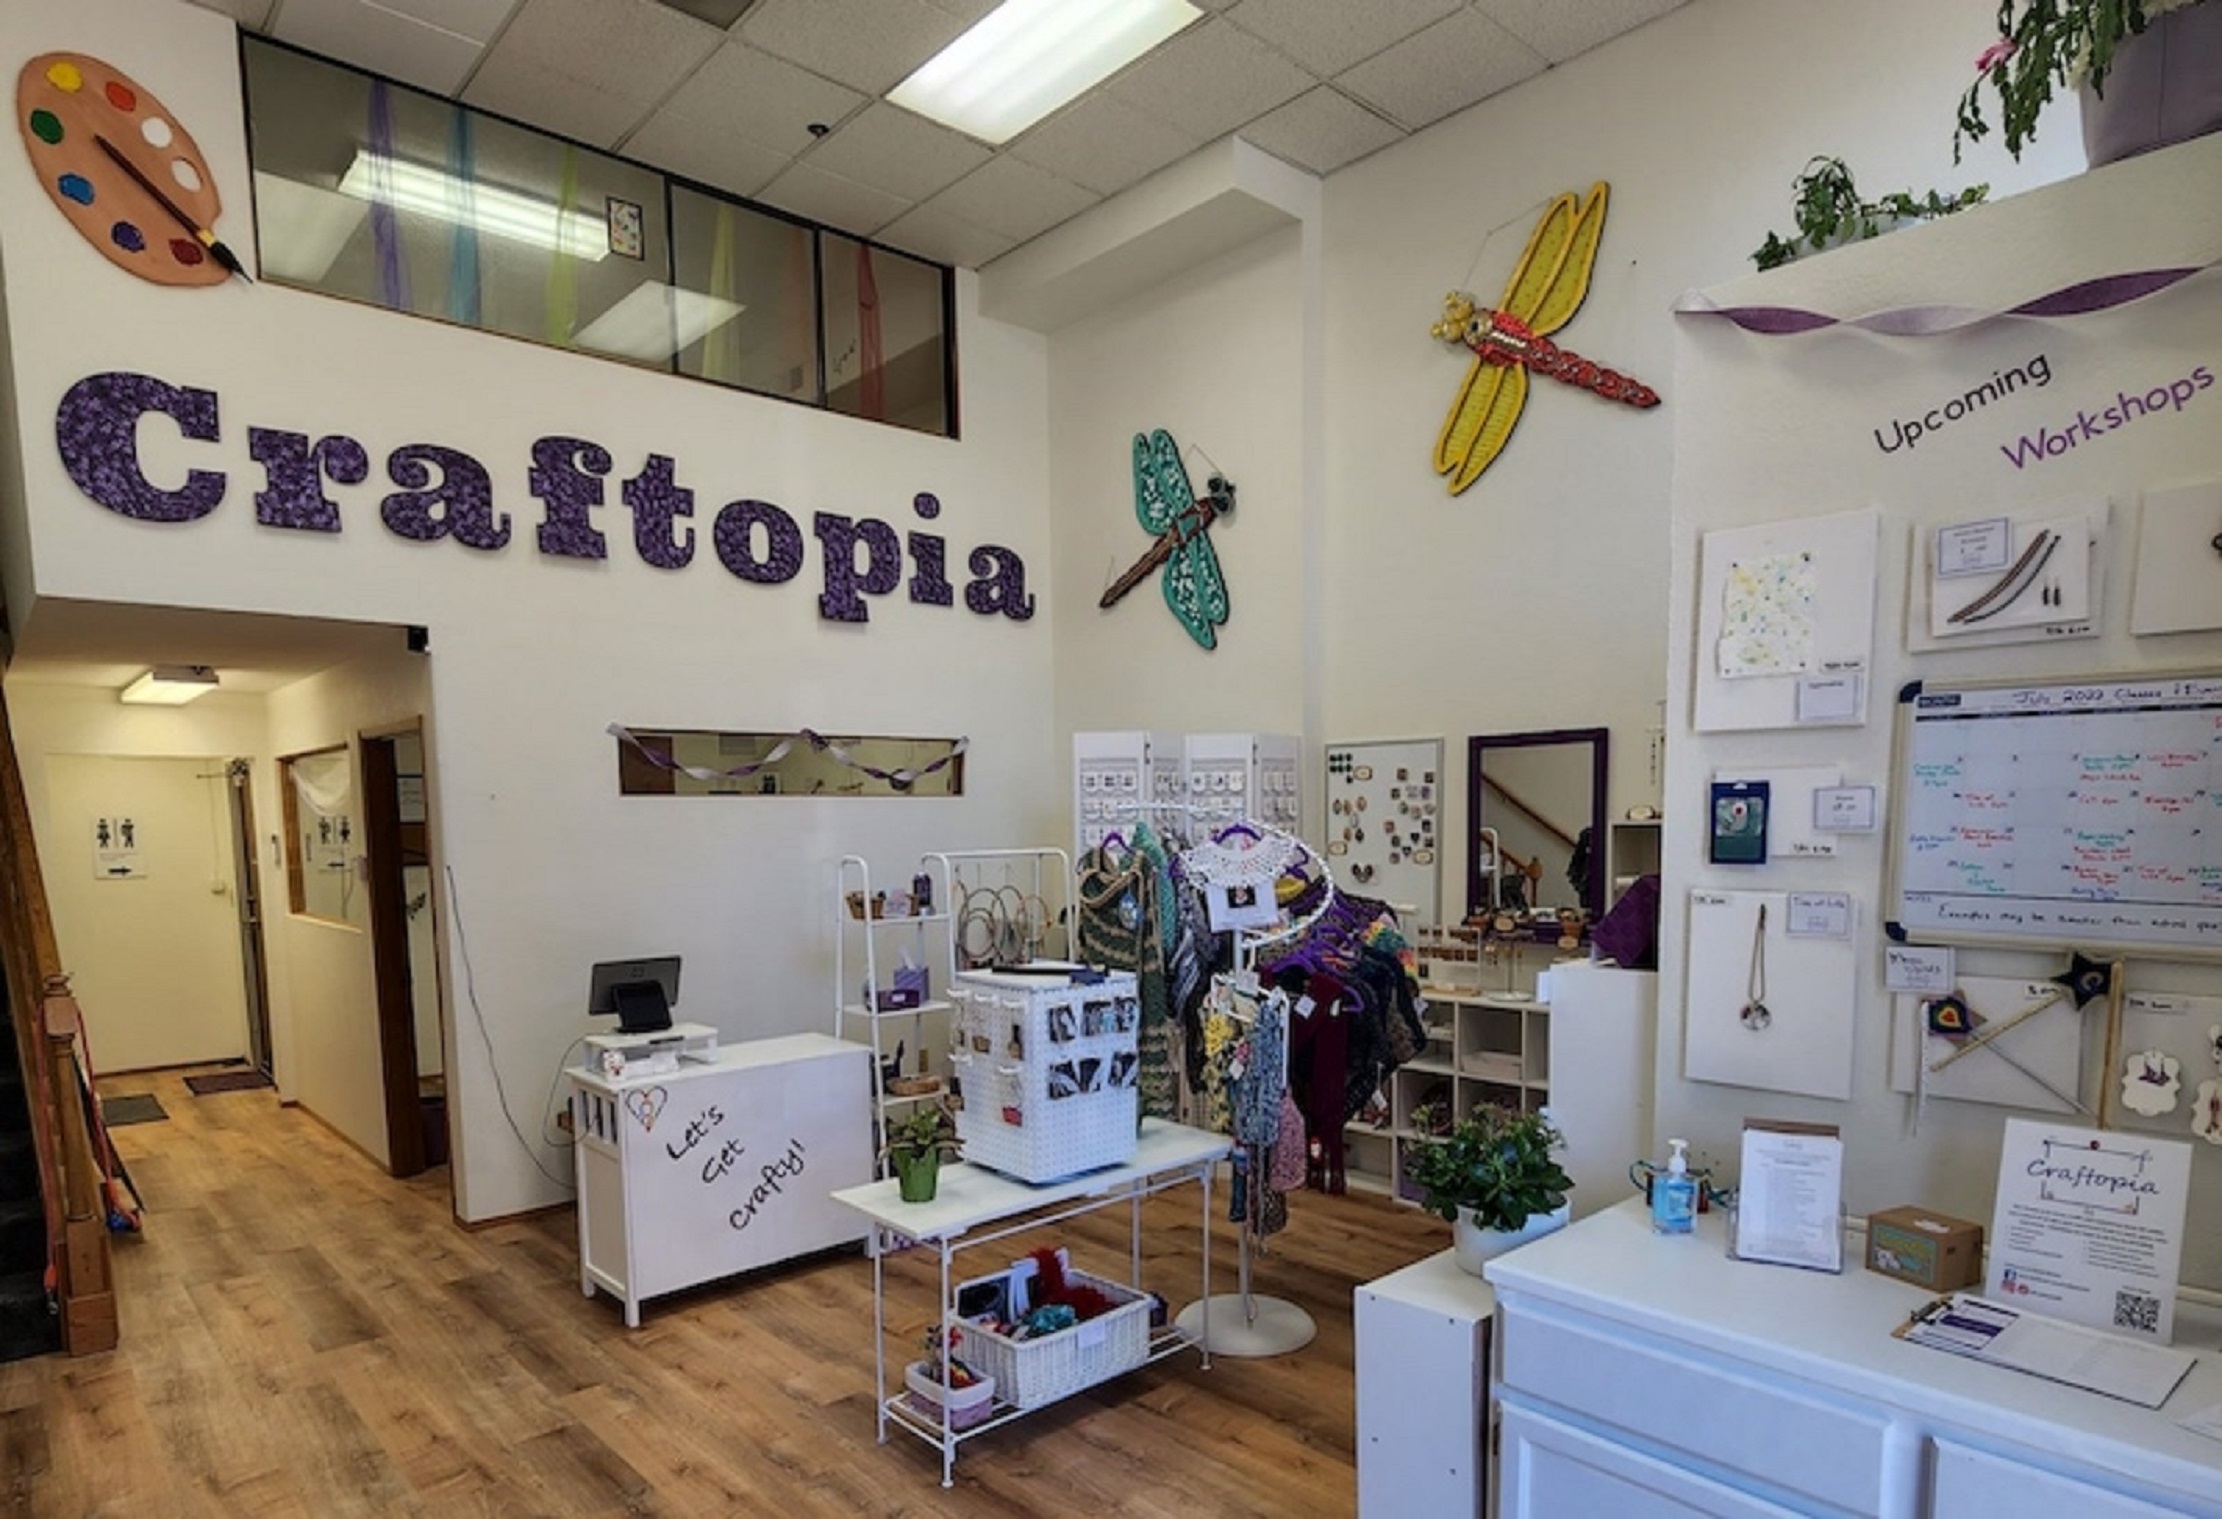 https://www.southsoundtalk.com/wp-content/uploads/2022/11/Tacoma-Craftopia-Retail-Space-Photo-Credit-Cora-Wells.jpg